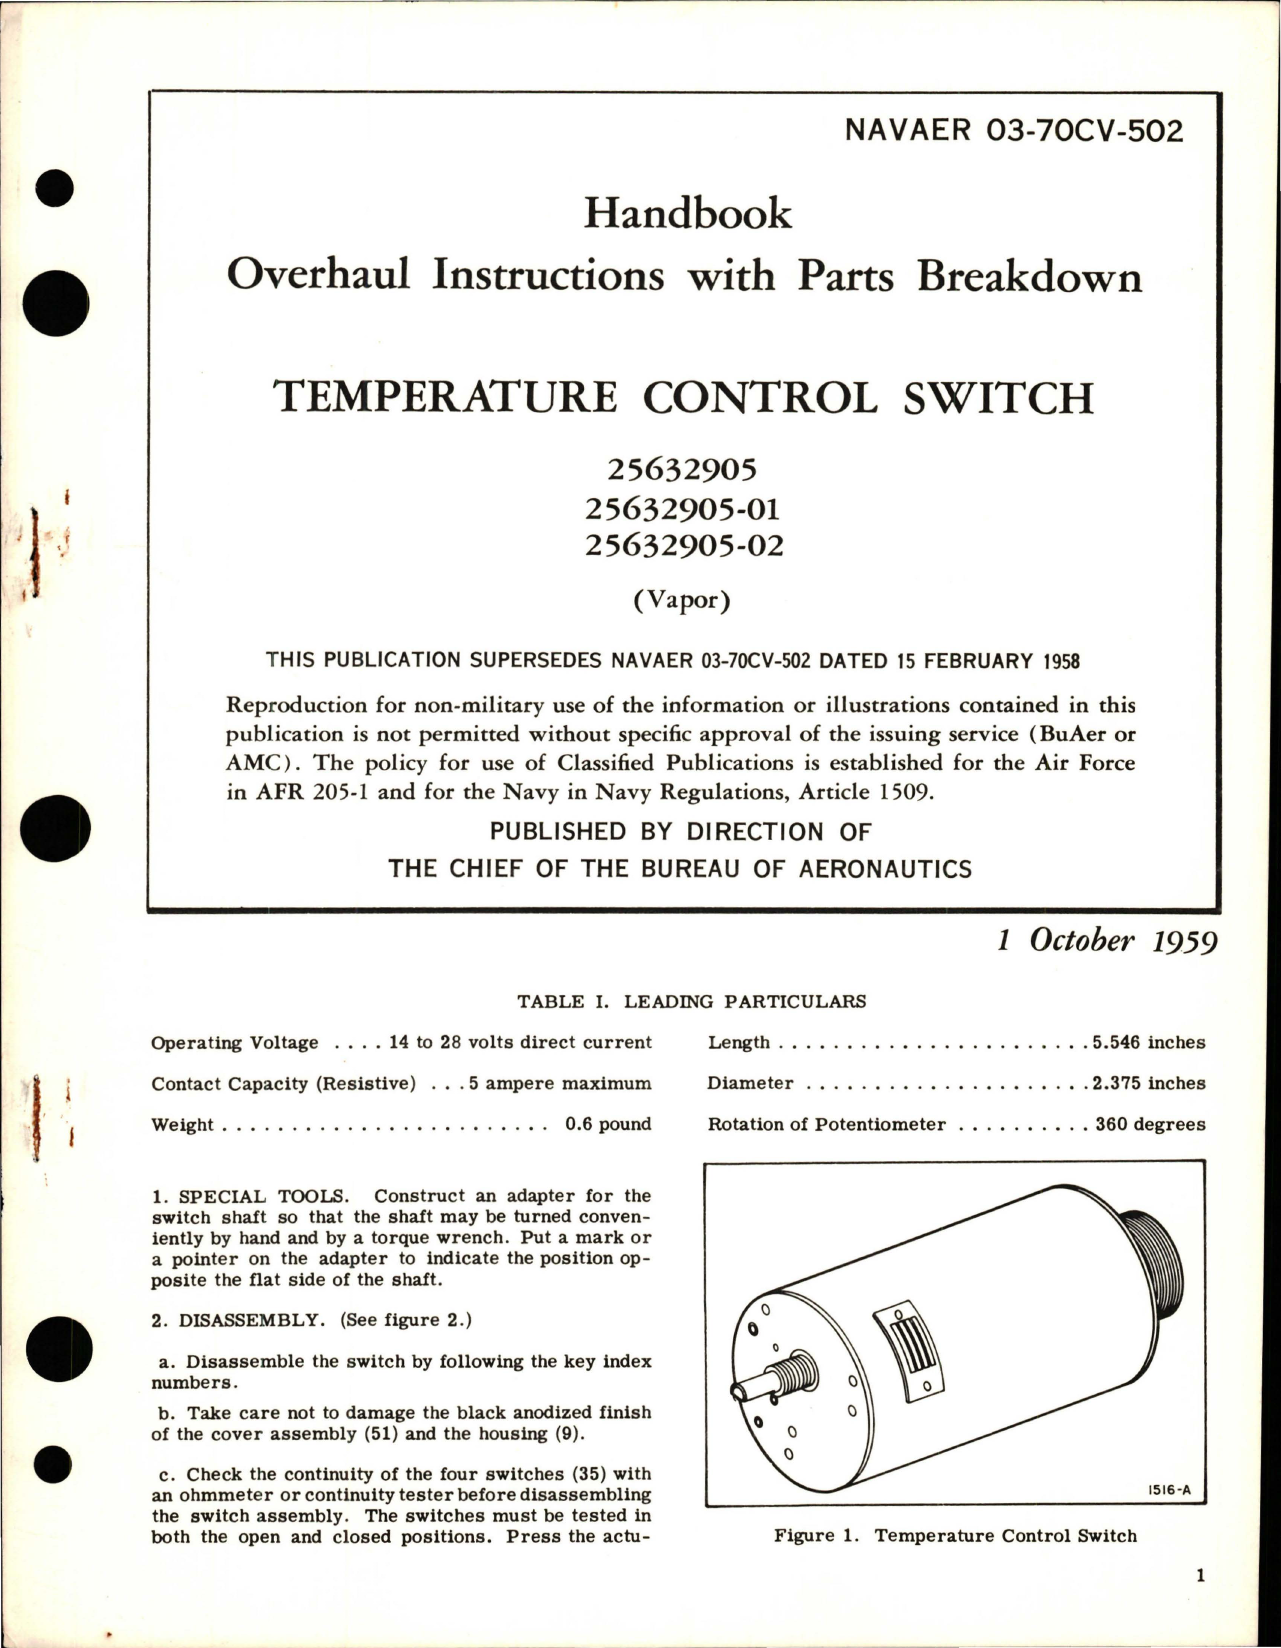 Sample page 1 from AirCorps Library document: Overhaul Instructions with Parts Breakdown for Temperature Control Switch - Parts 25632905, 25632905-01, and 25632905-02